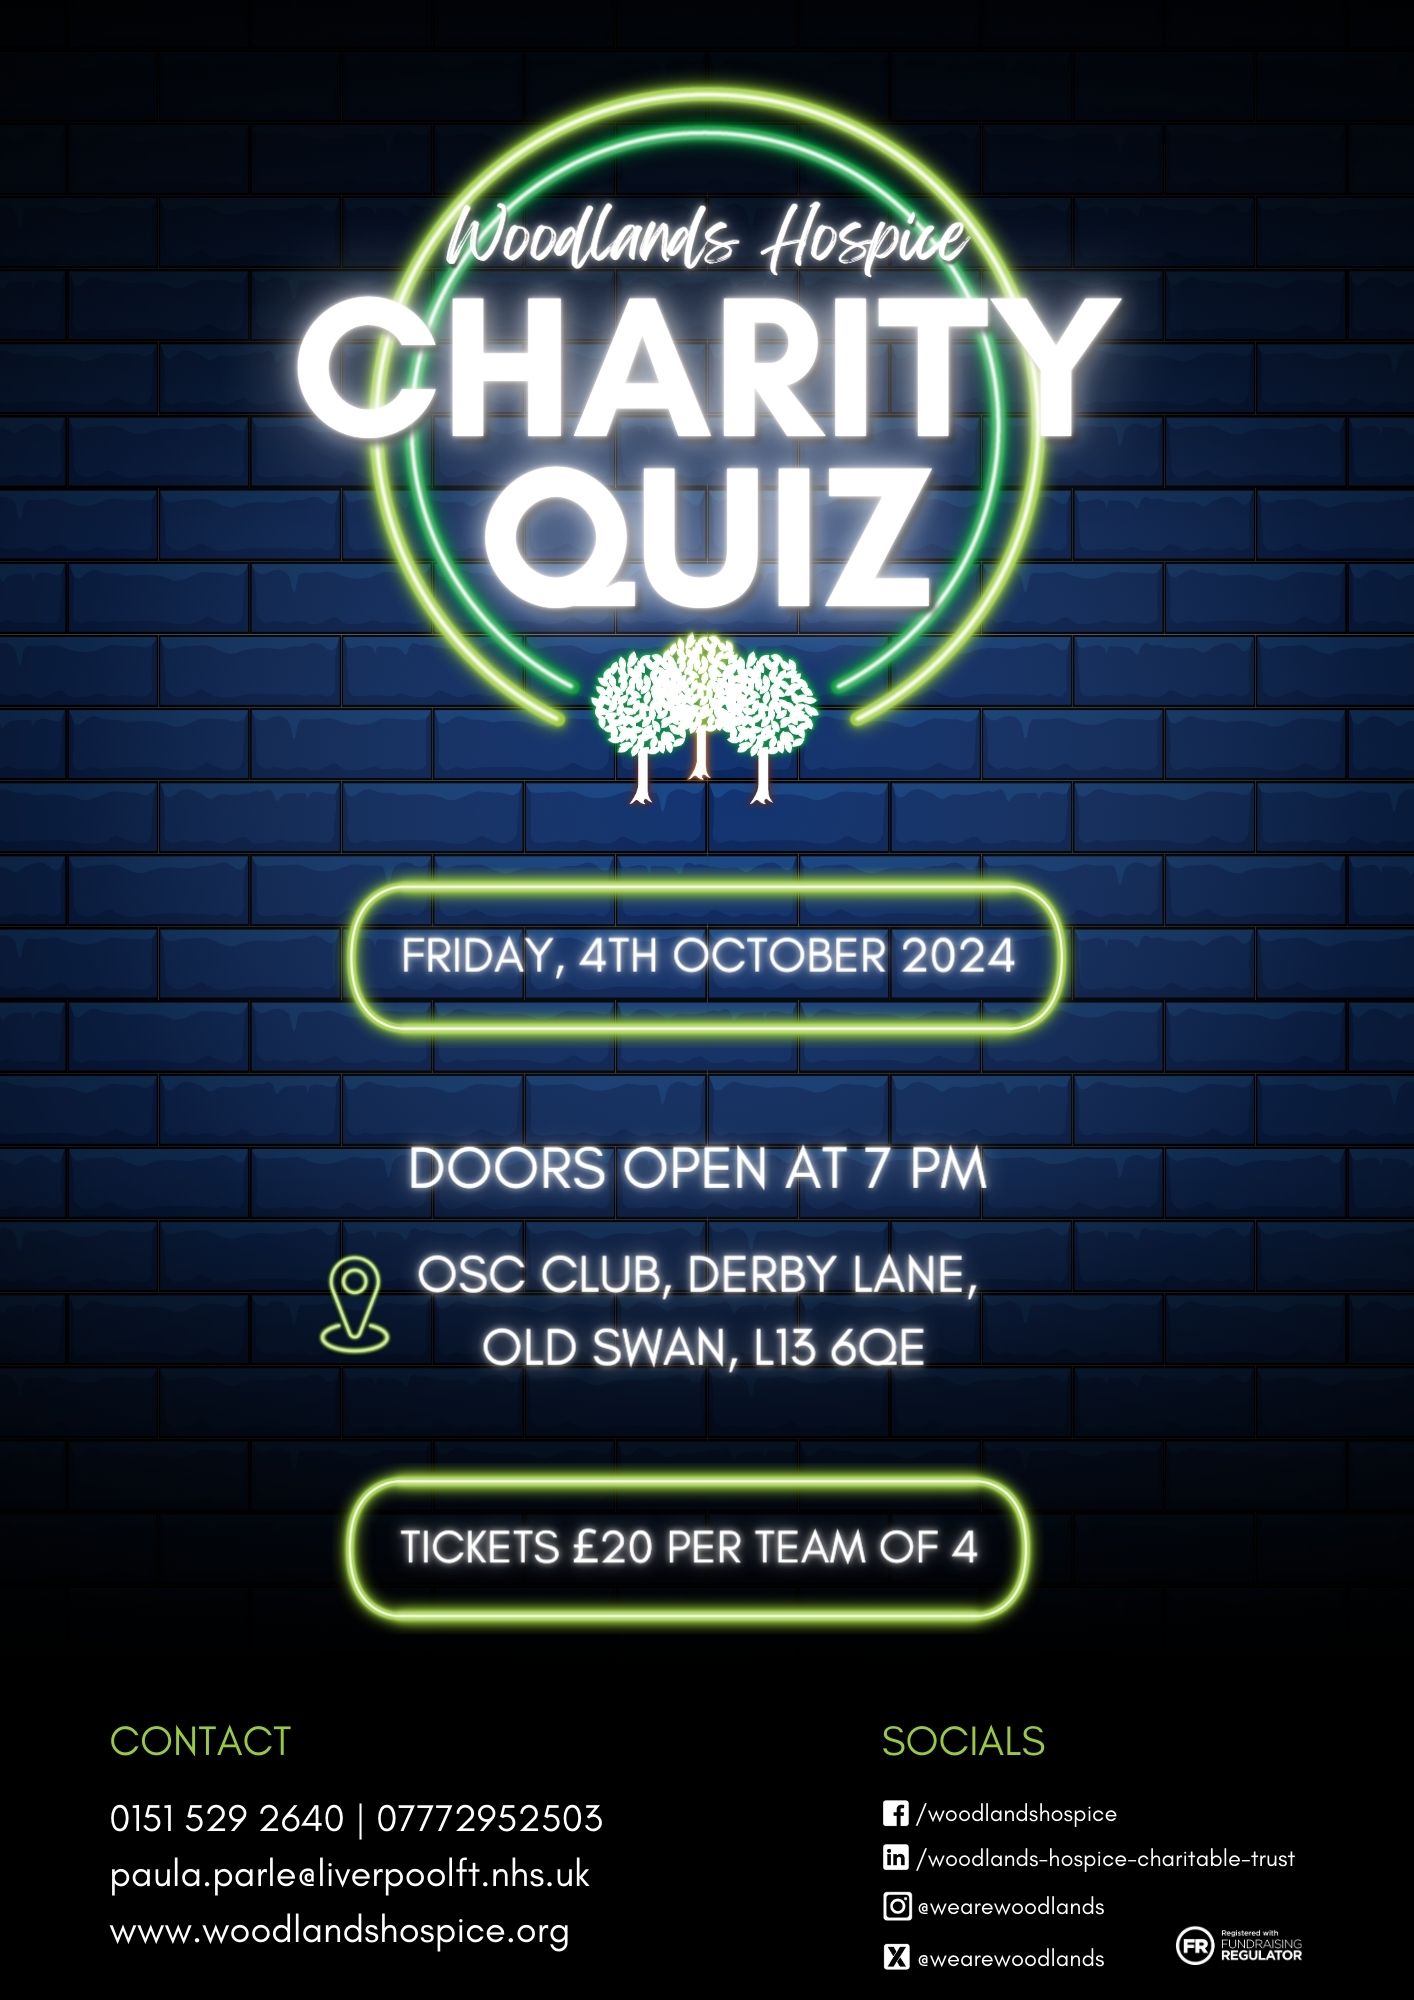 Event Details Friday 4th October 2024  OSC Club, Derby Lane, Old Swan L13 6QE.  Doors Open at 7pm, Quiz Starts at 8pm.  Tickets £20 per team of 4, mixed teams preferred but not essential.  Mid evening entertainment.  Raffle & Roll the Pound Coin fun on the night.